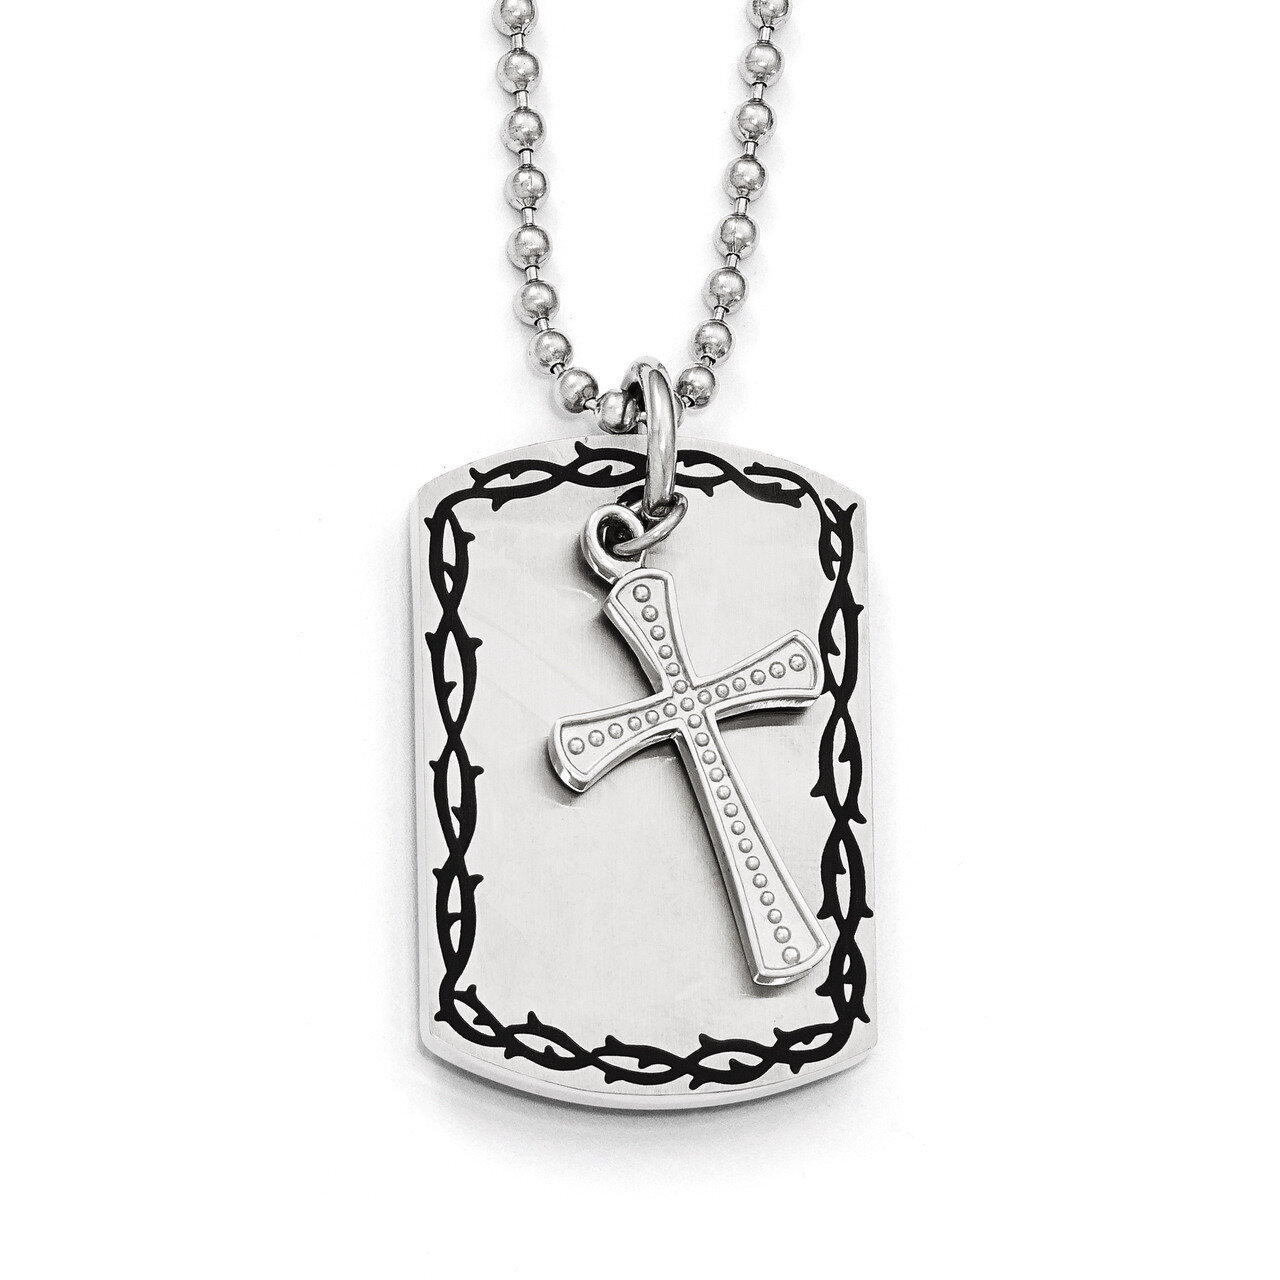 Brushed, Polished and Antiqued 2 Piece Necklace - Stainless Steel SRN1810-22